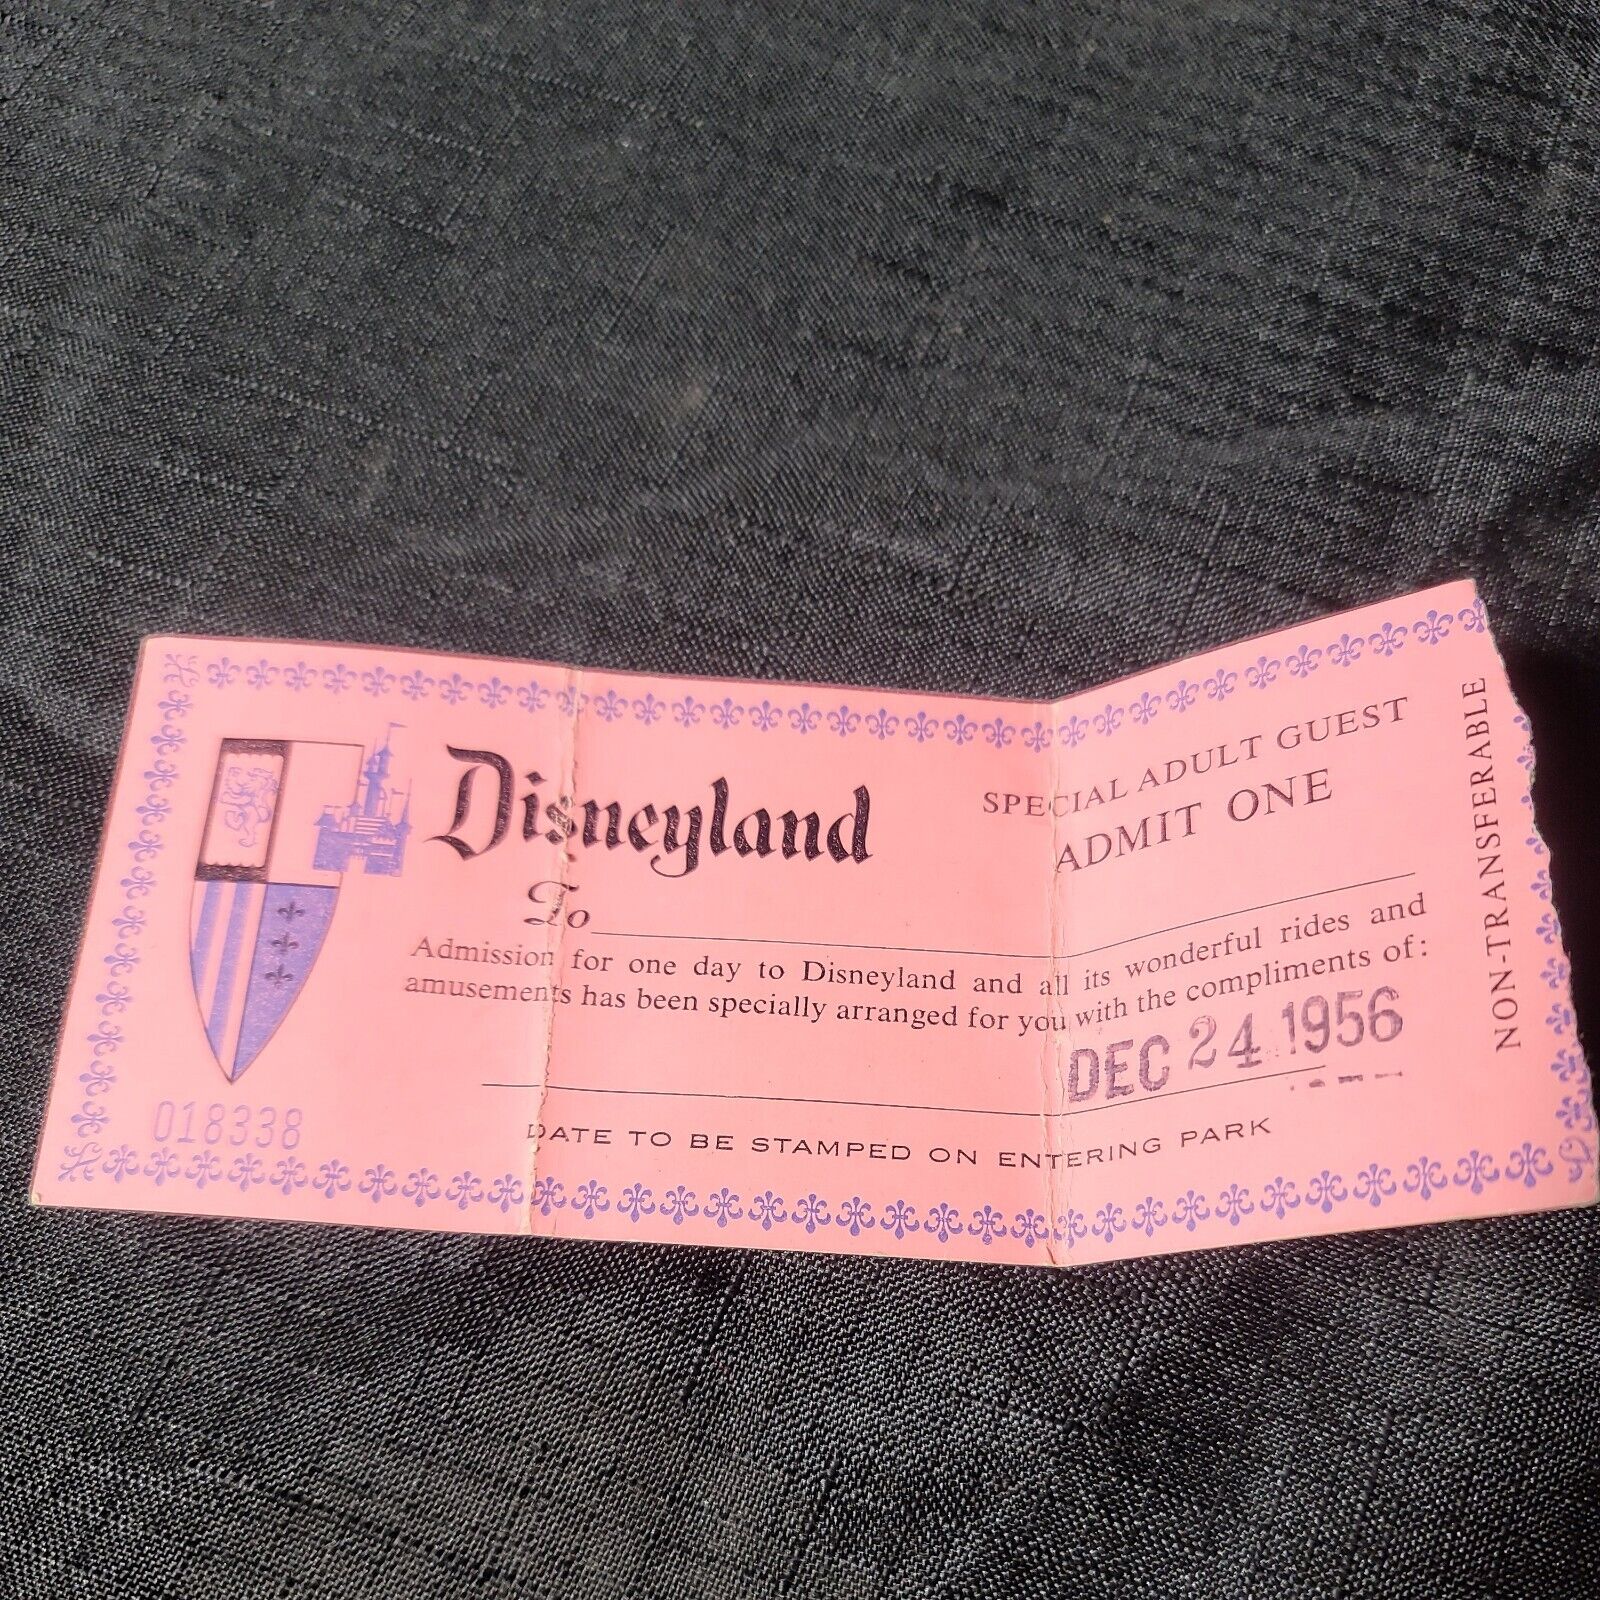 Rare 1956 Disneyland Special Adult Guest Complimentary Ticket Stub Used Admit 1